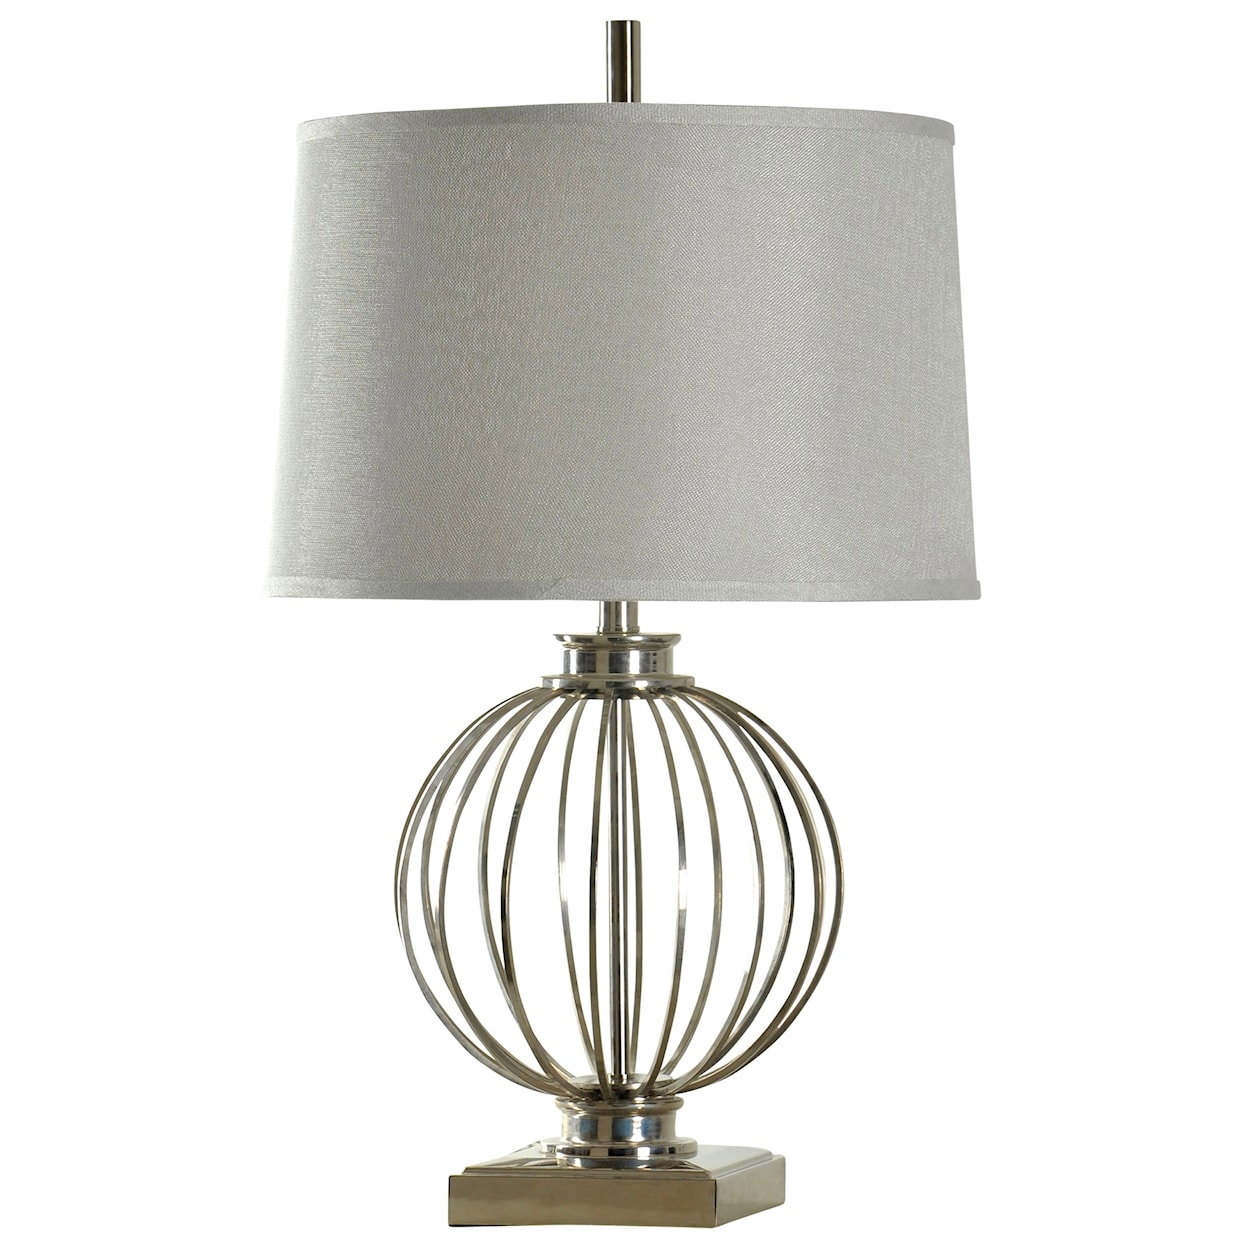 StyleCraft Lamps Transitional Polished Nickel Table Lamp